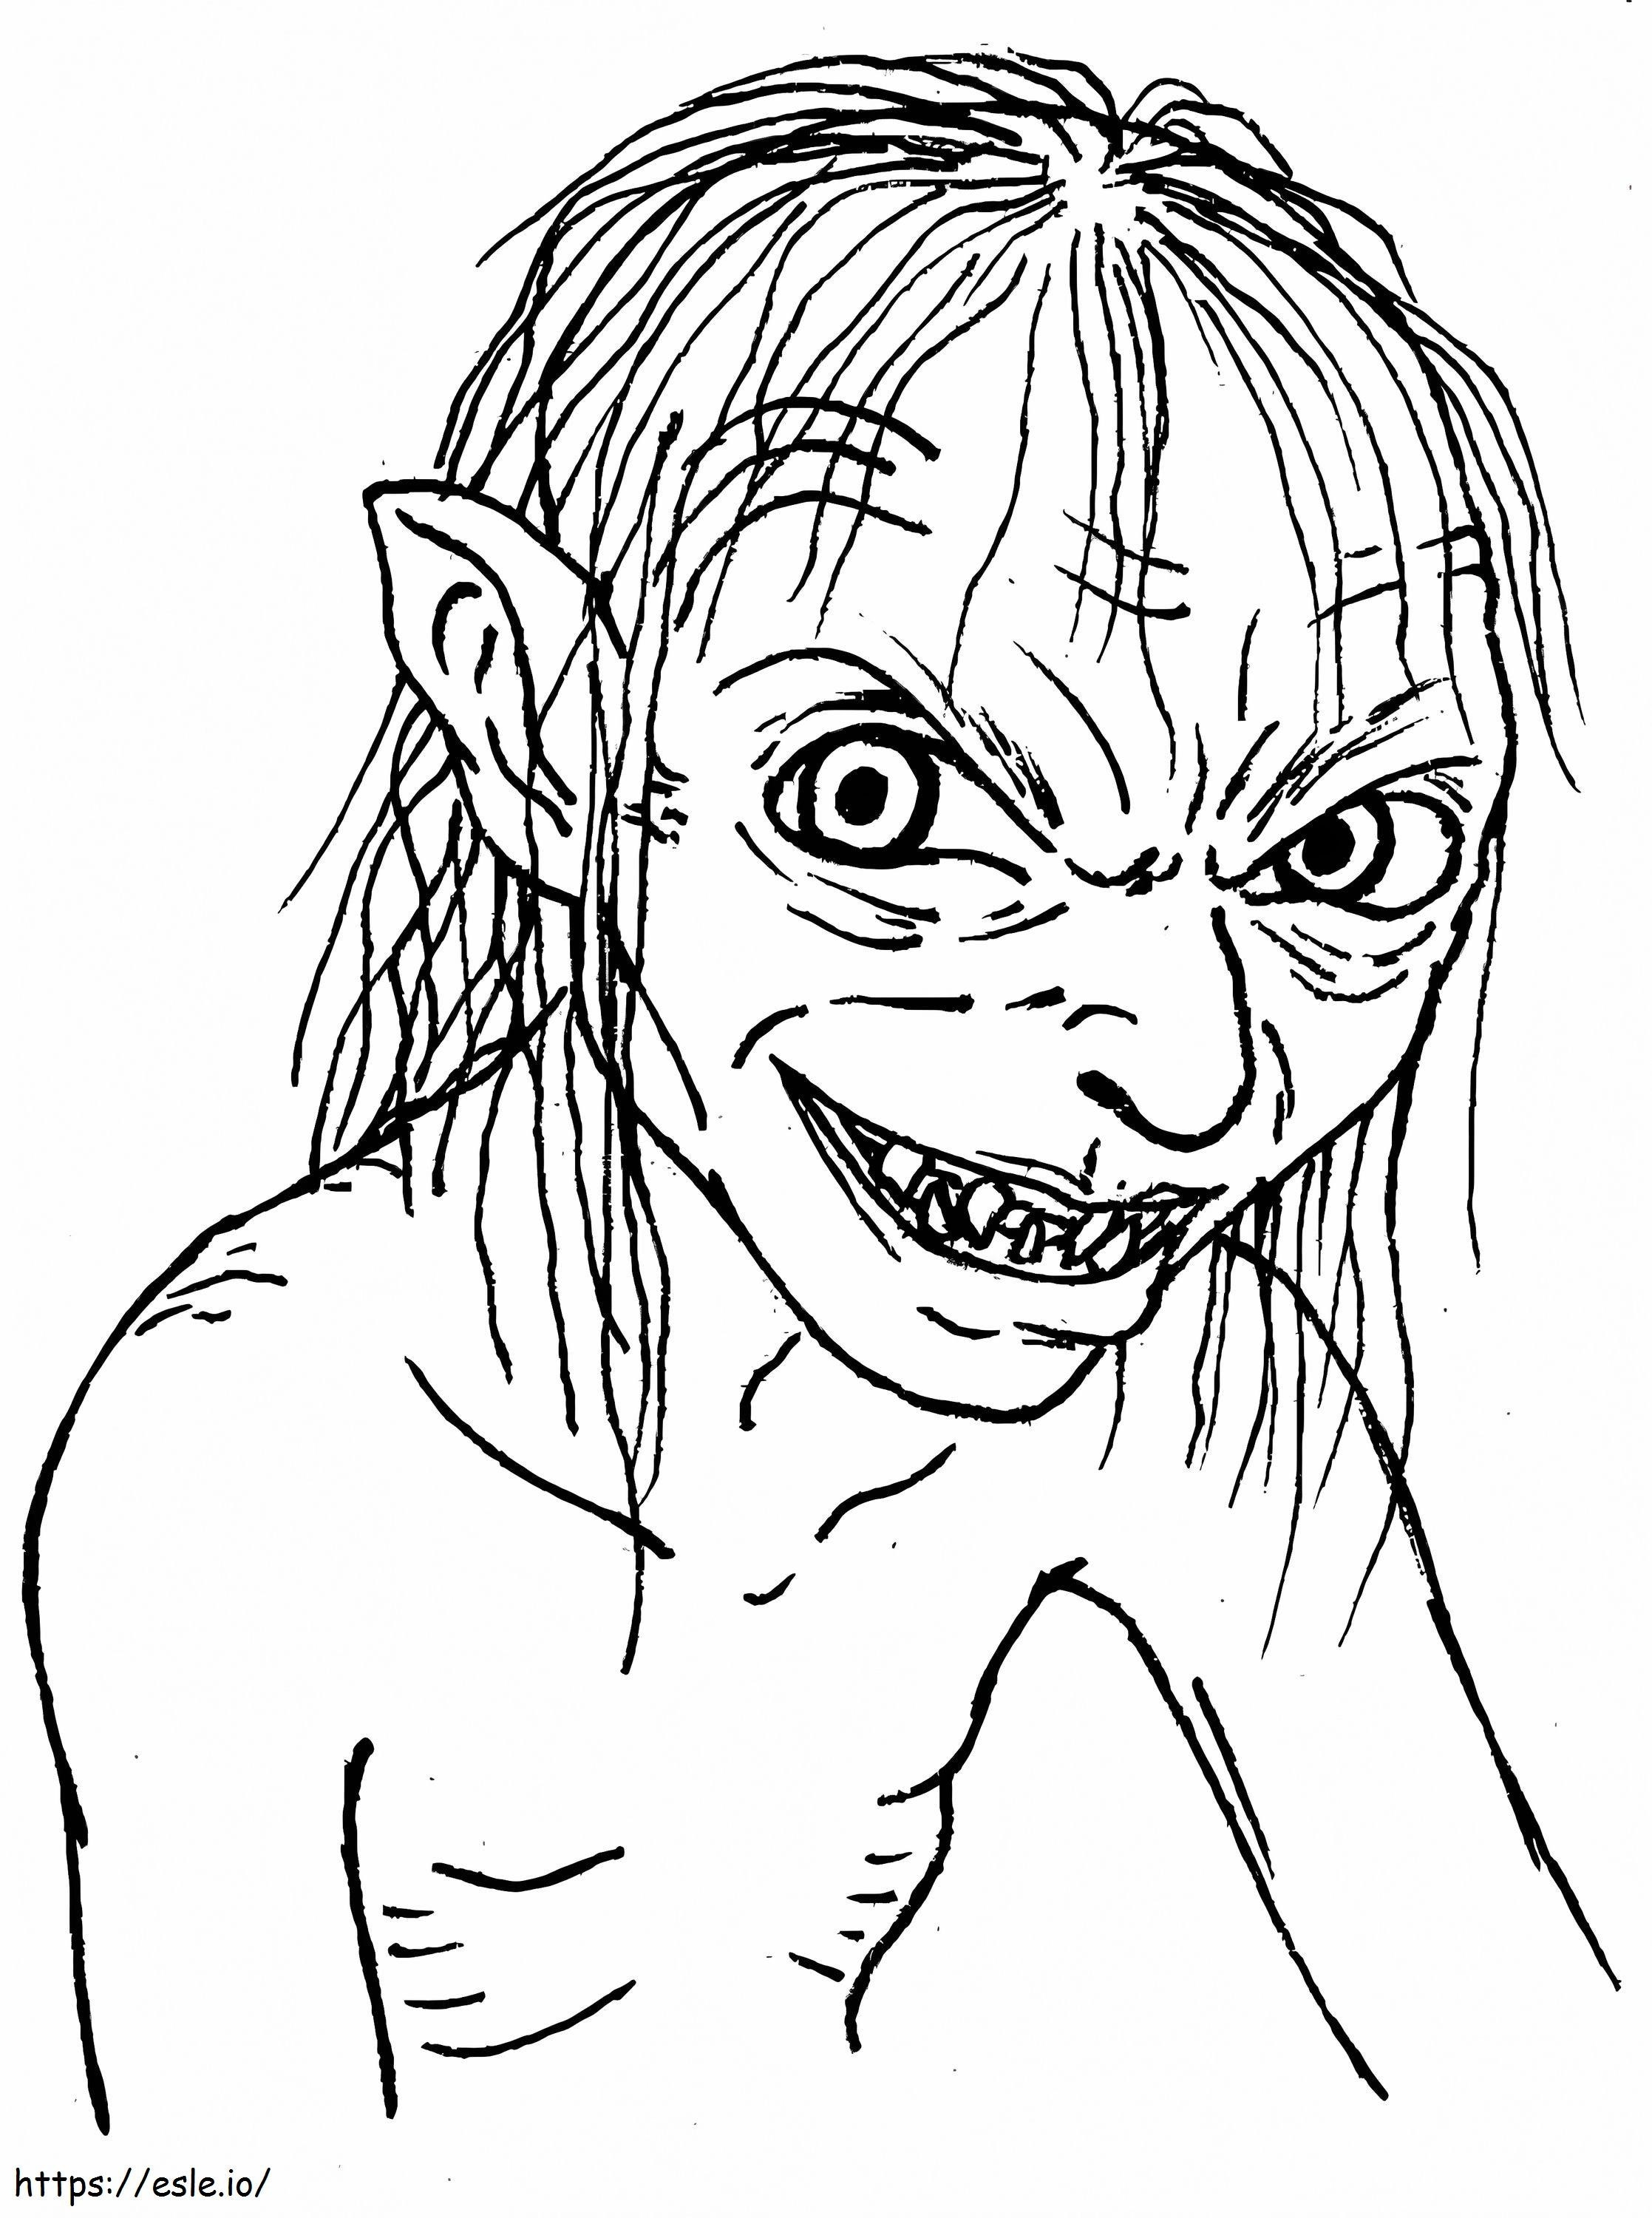 Gollum coloring page